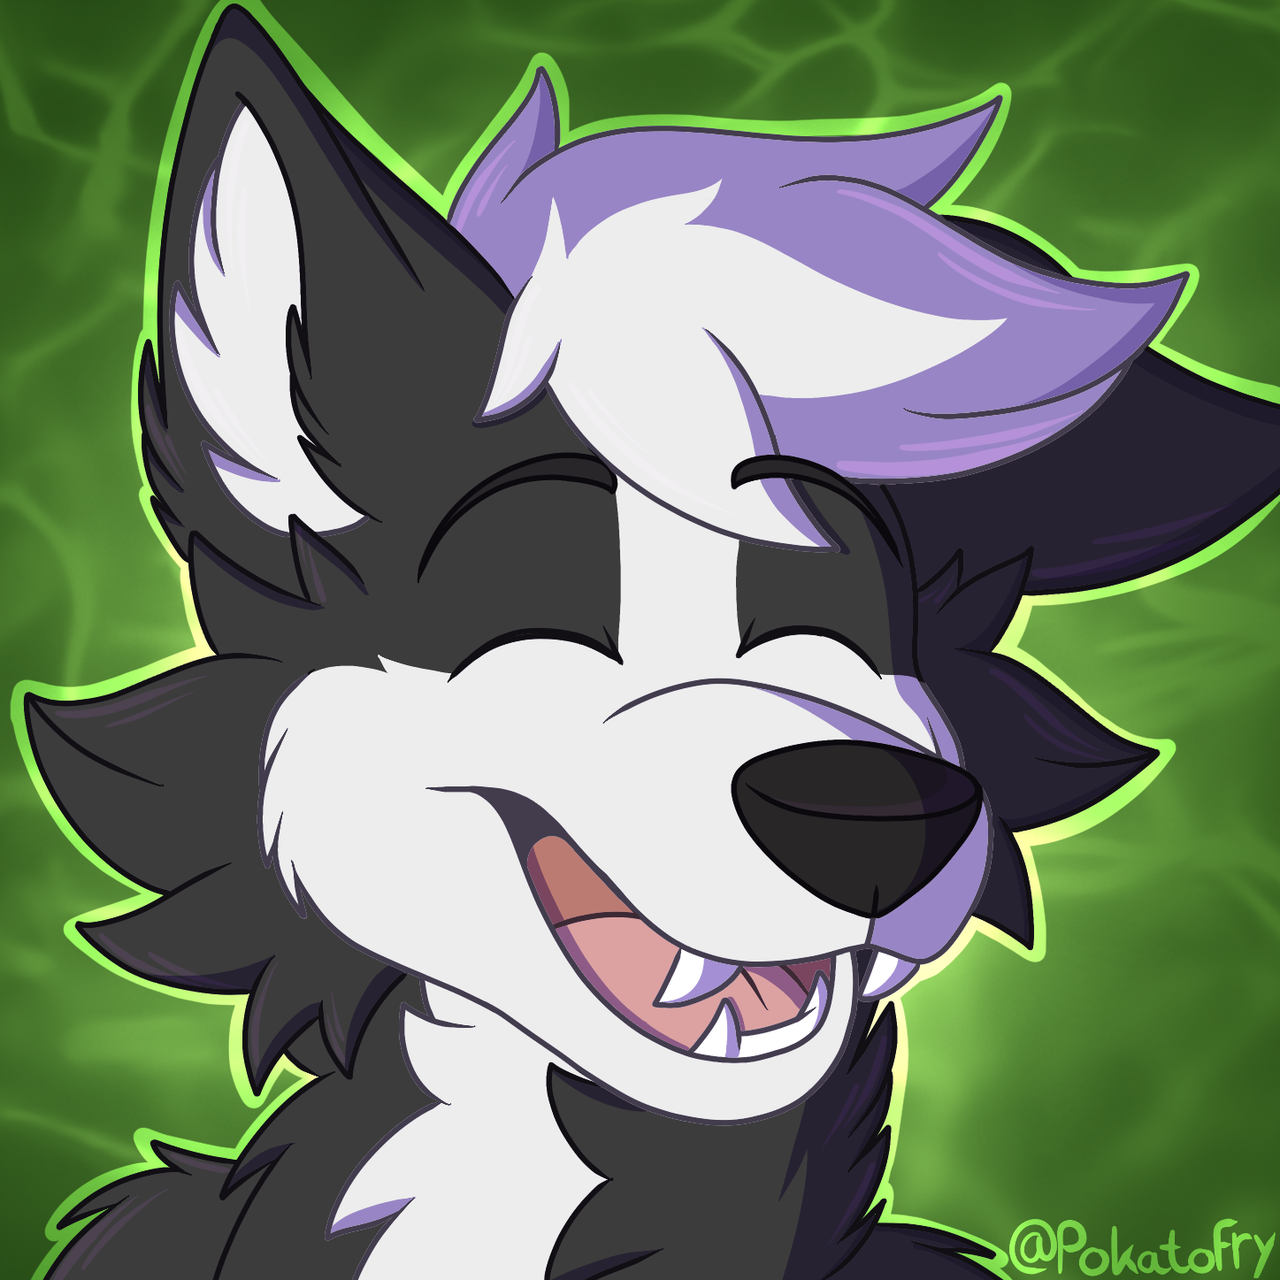 Laughing Collie x3